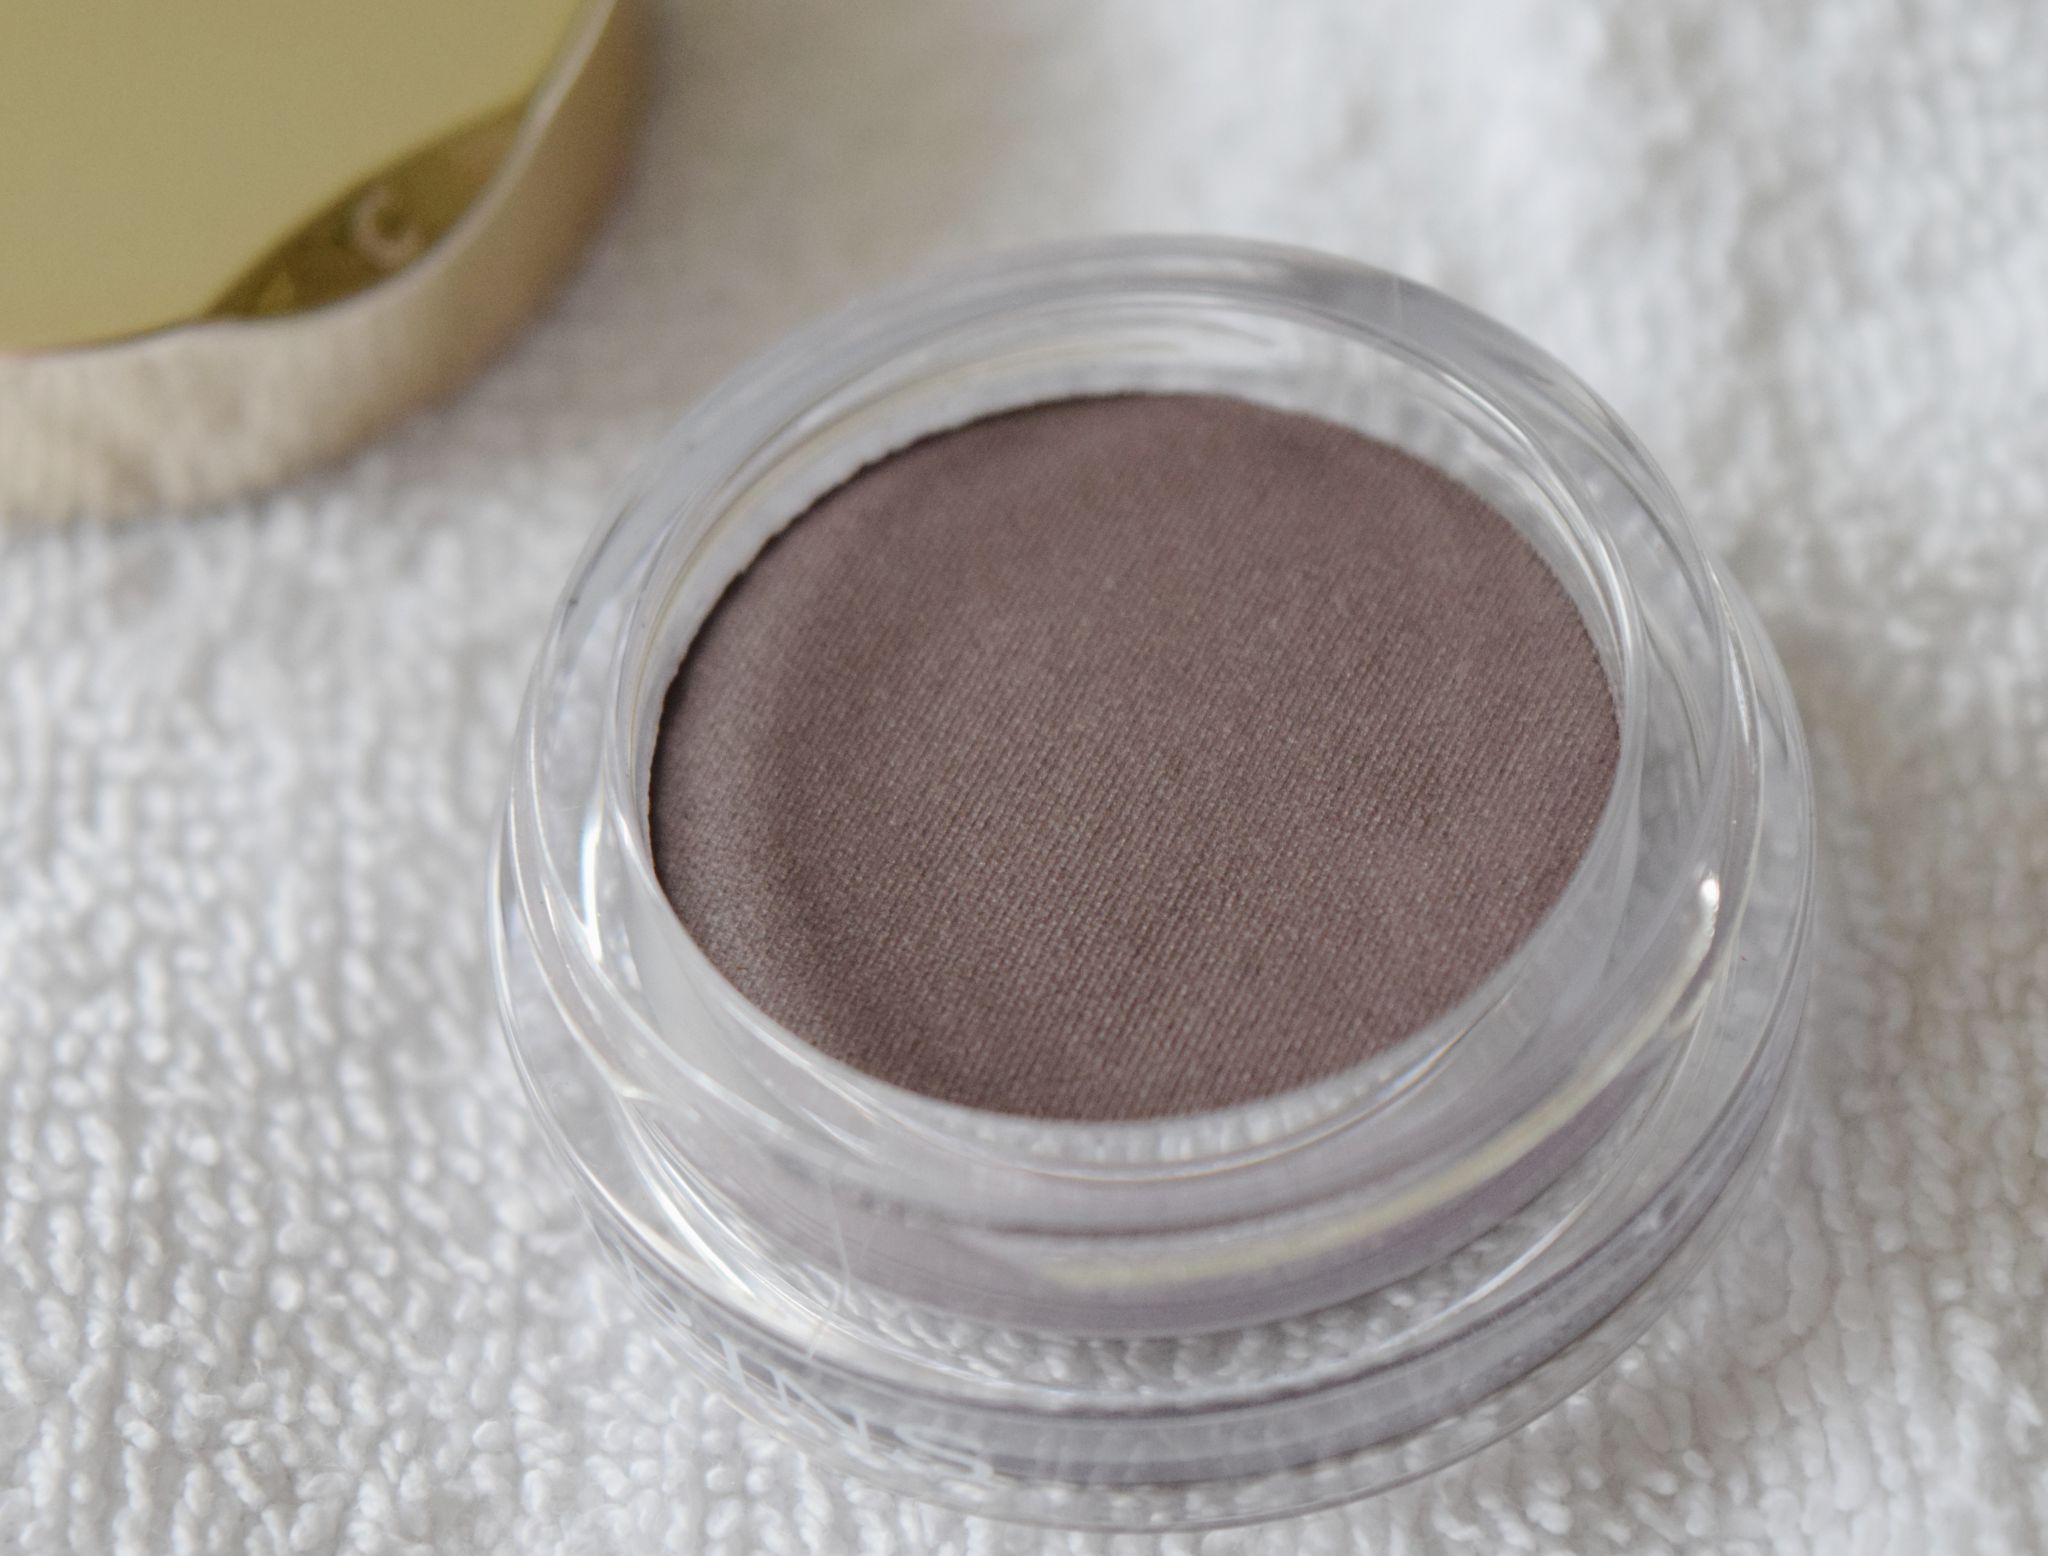 clarins ombre matte eyeshadow review